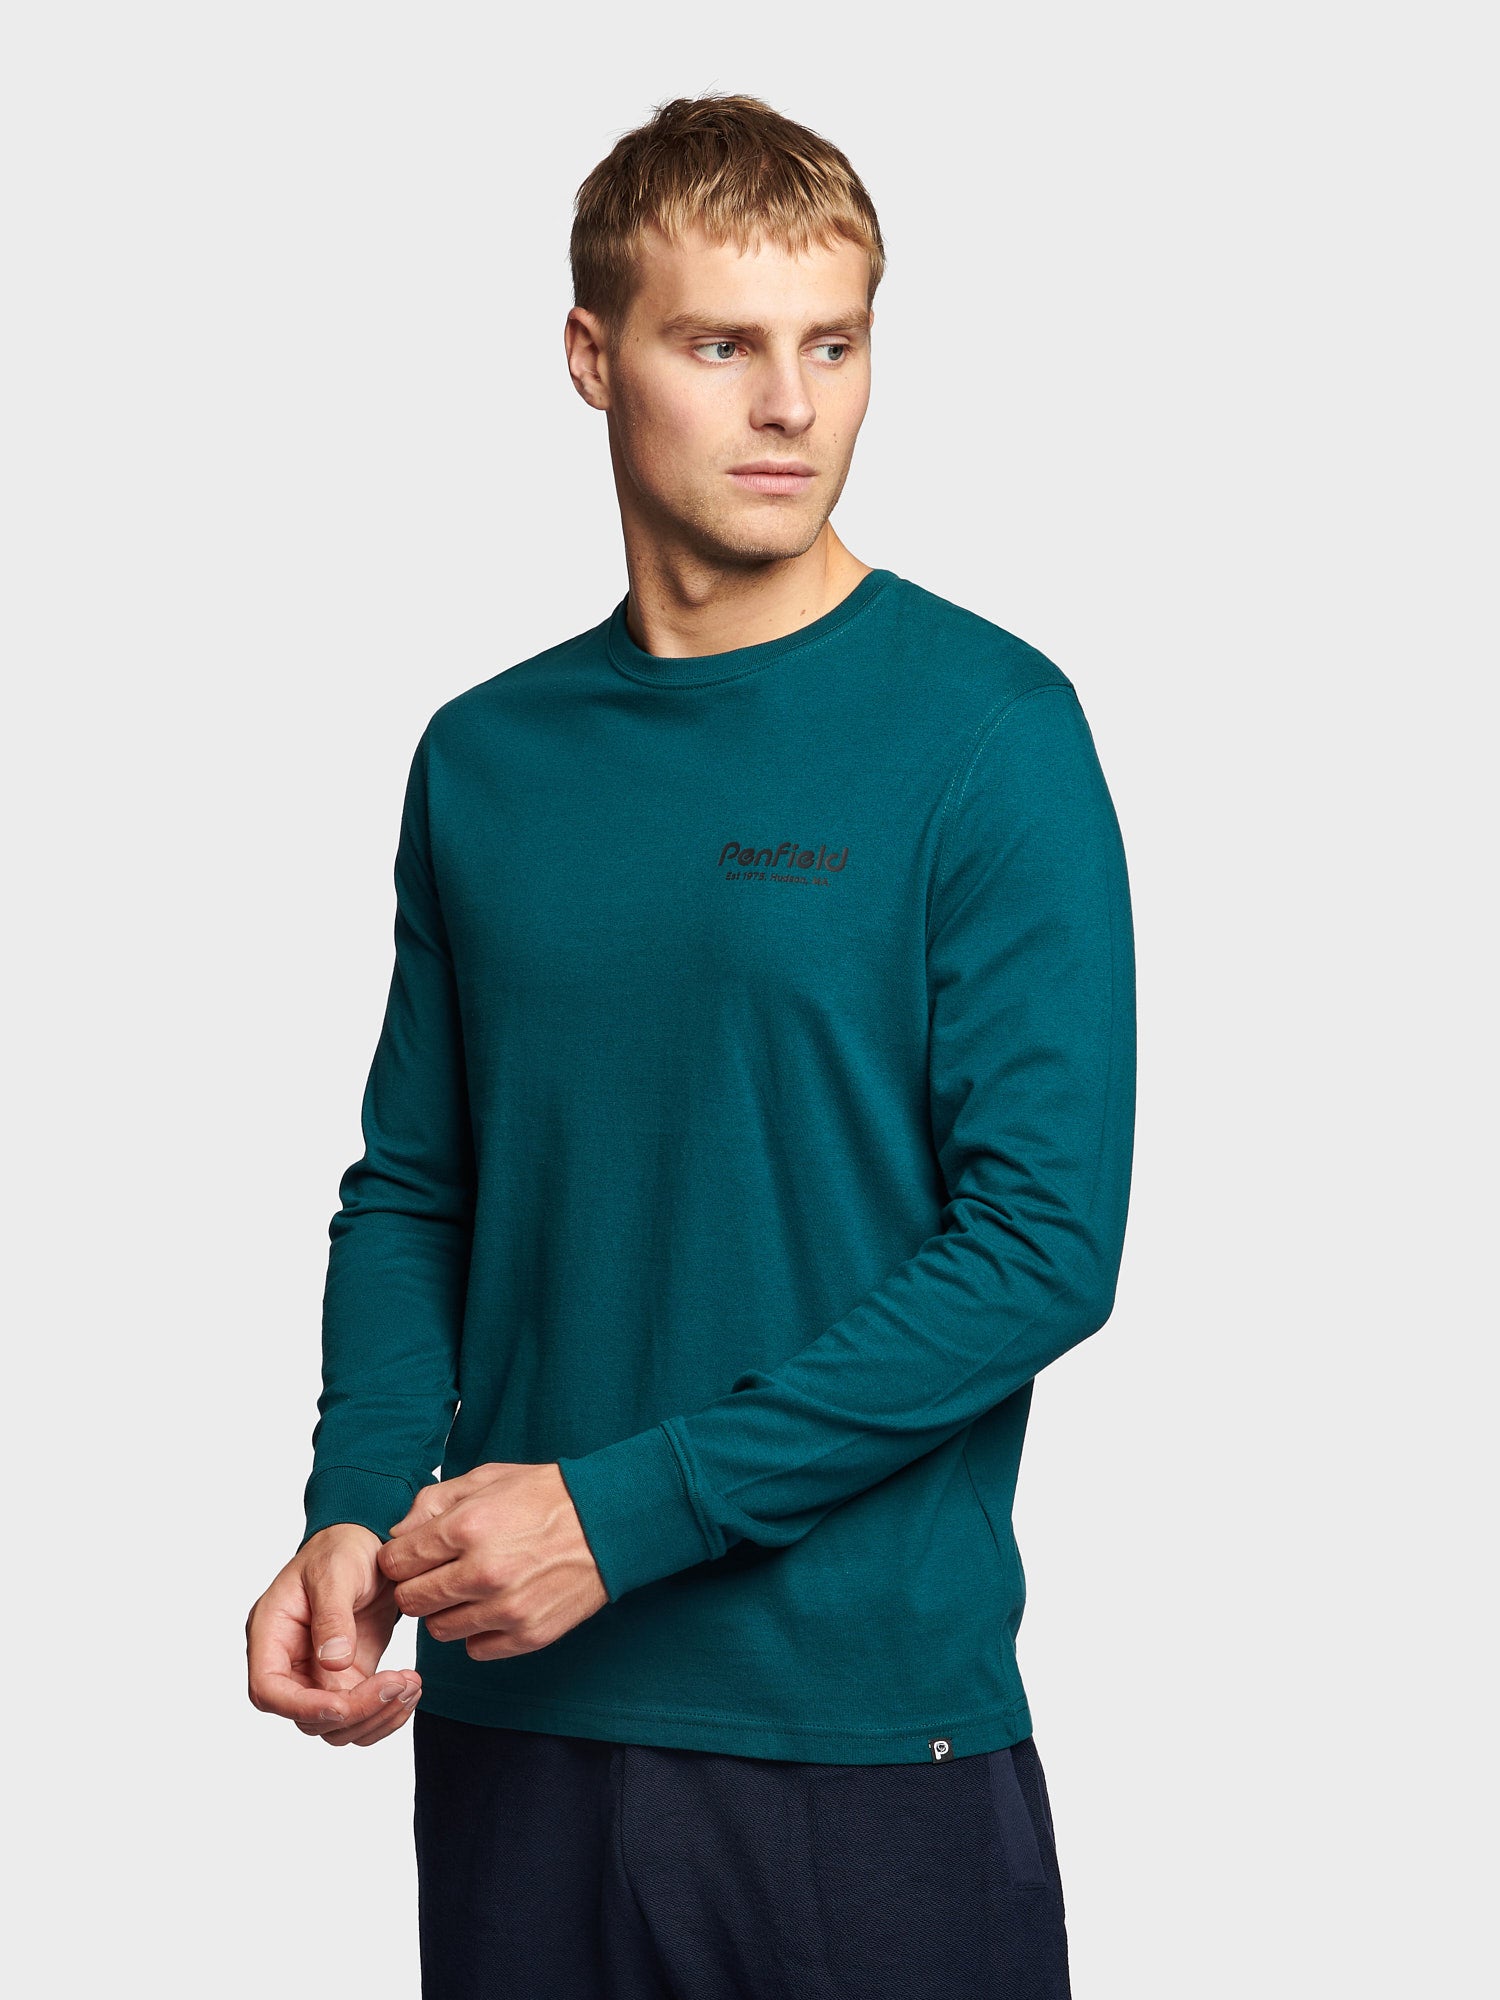 Sketch Mountain Back Graphic Long Sleeve T-Shirt in Deep Teal